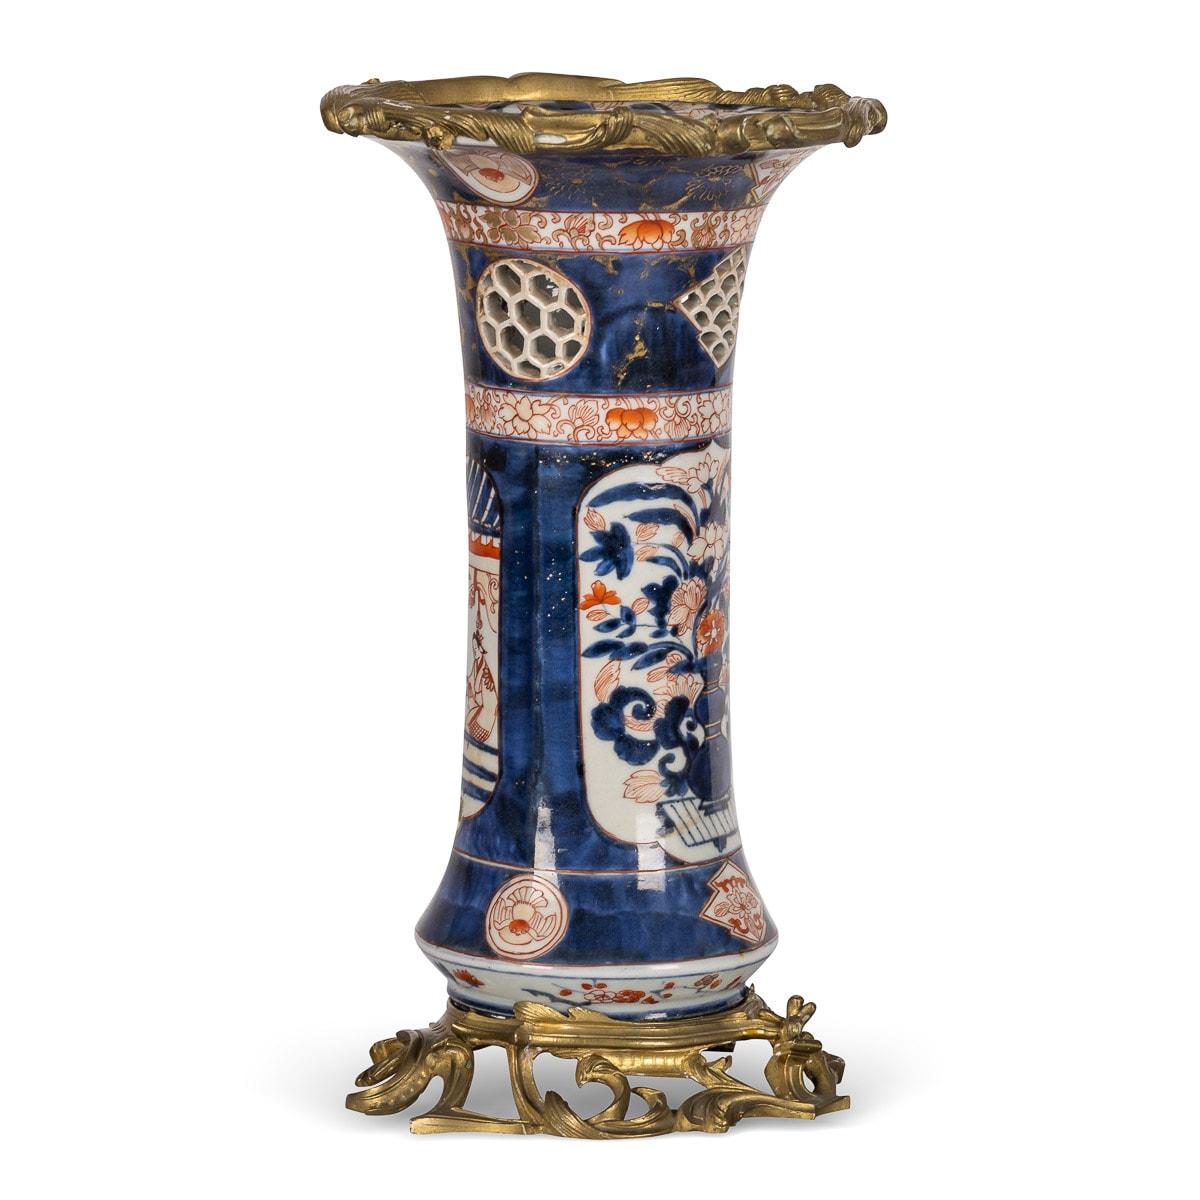 Antique late-19th century French Imari style porcelain vase mounted on ormolu. The cylindrical body fitted with a ormolu cast floral and scroll rim and raised on a pierced voluted ormolu base, vase decorated with traditional Japanese rural scenes